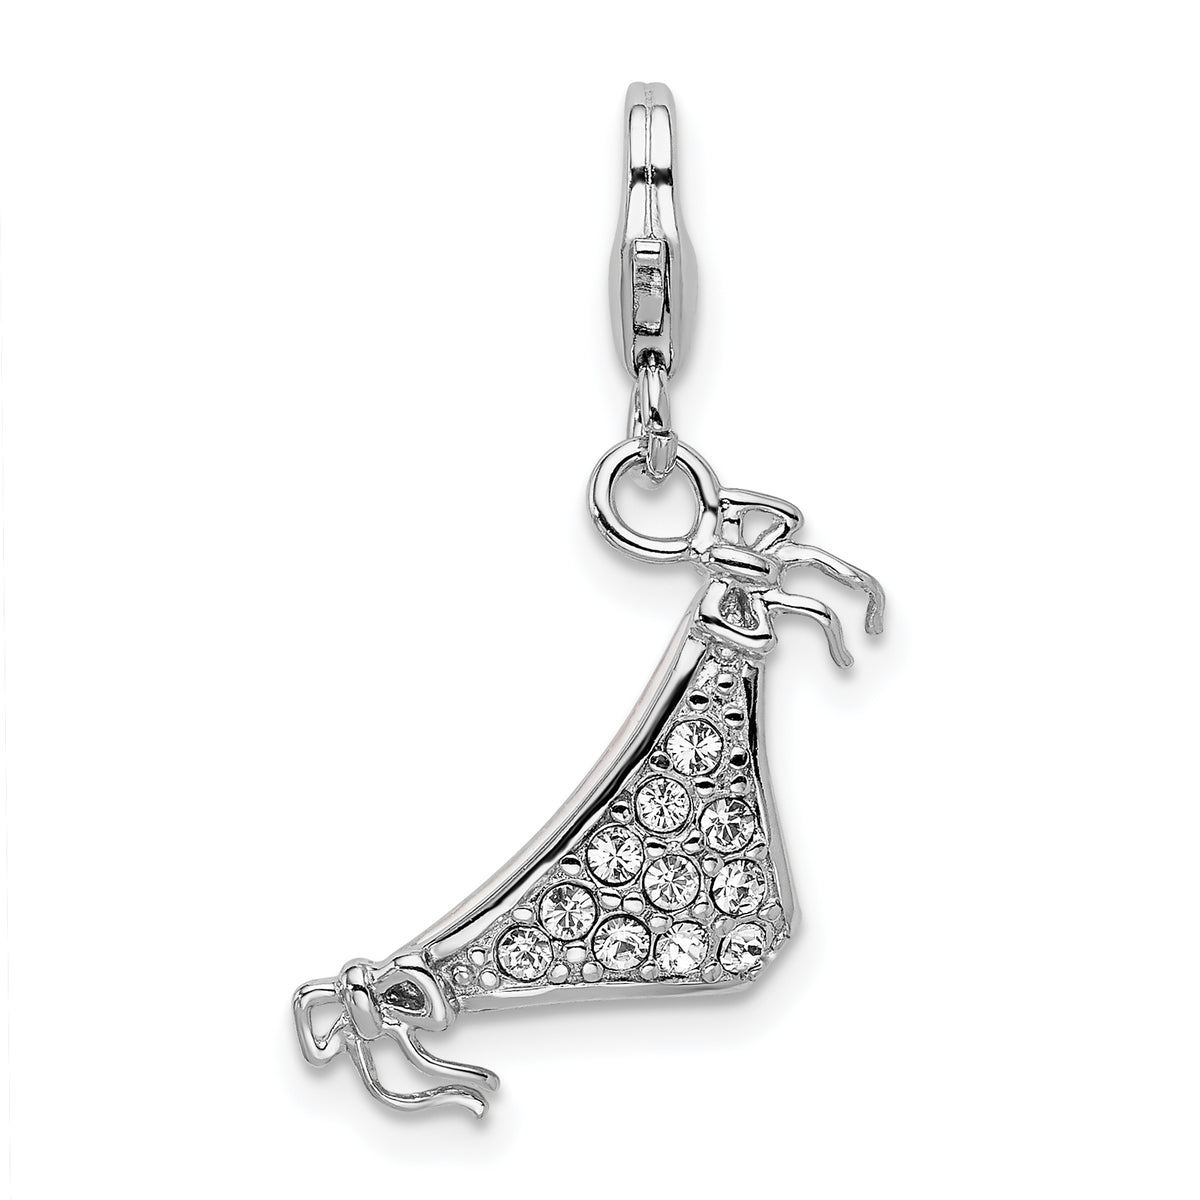 Amore La Vita Sterling Silver Rhodium-plated Polished 3-D Enameled Bikini Bottom Charm with Fancy Lobster Clasp